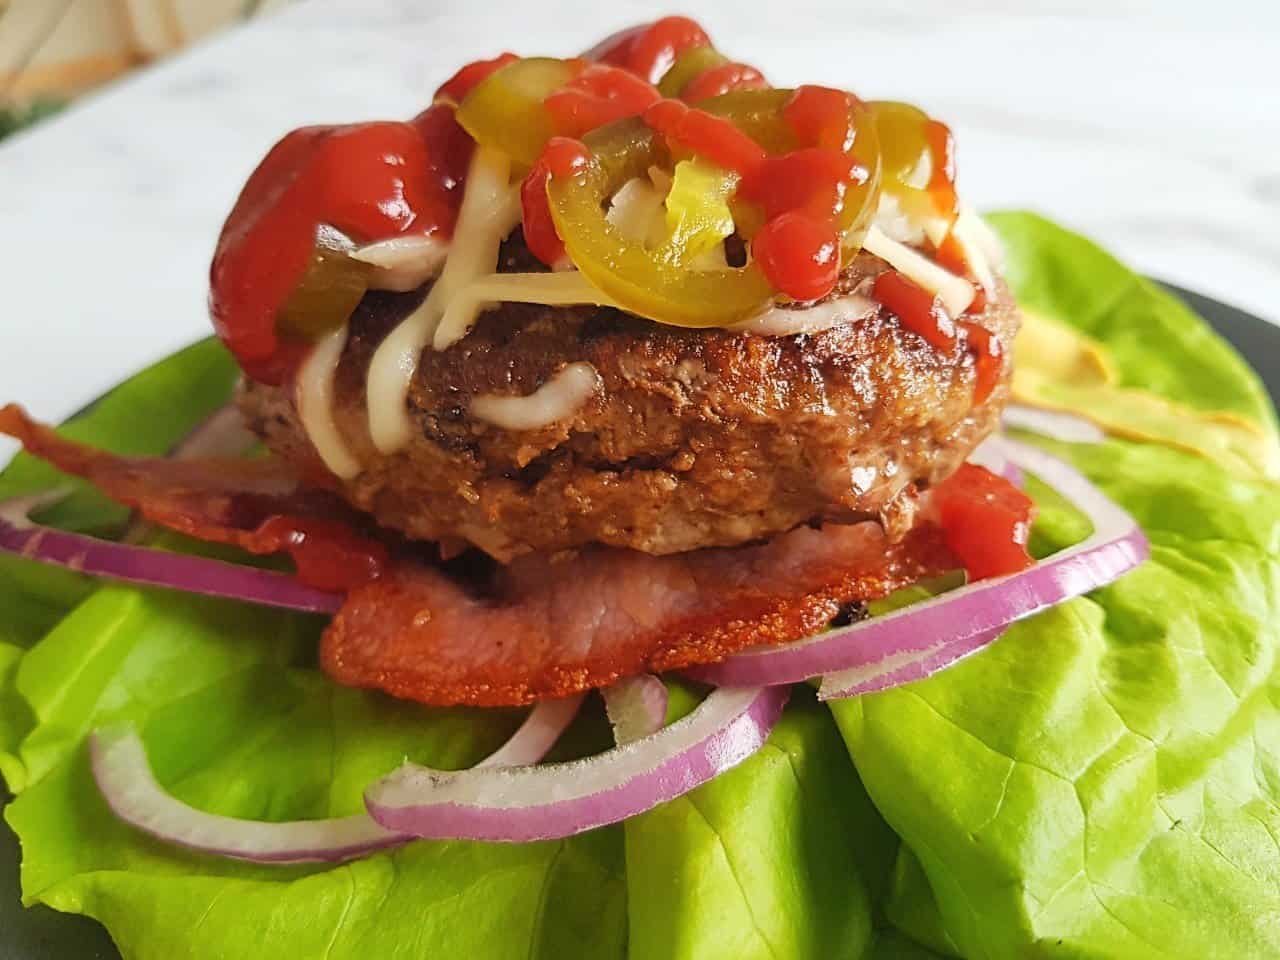 Beef burger patty on salad leaves with toppings.